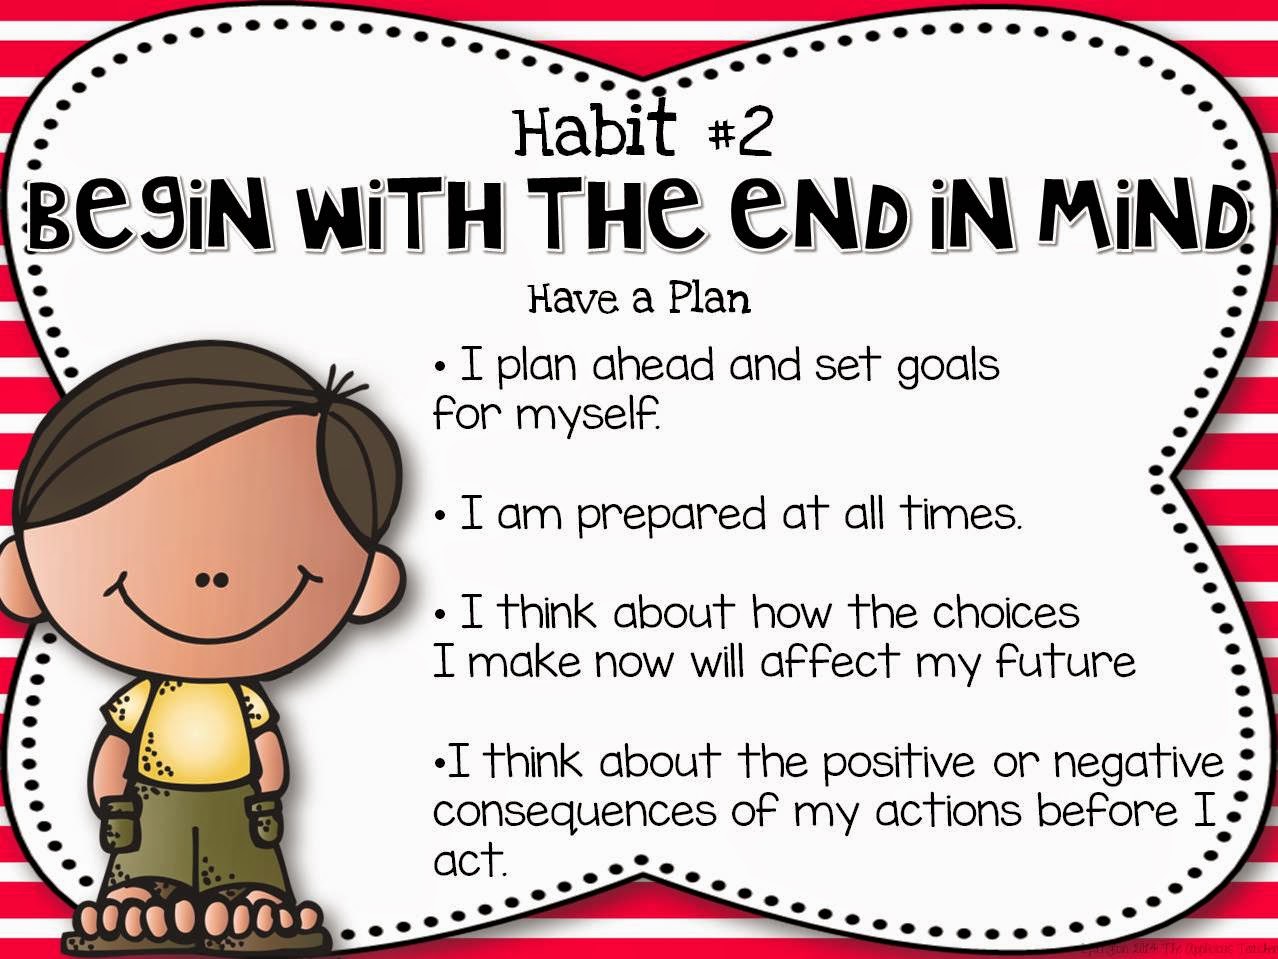 HABIT 2:  BEGIN WITH THE END IN MIND